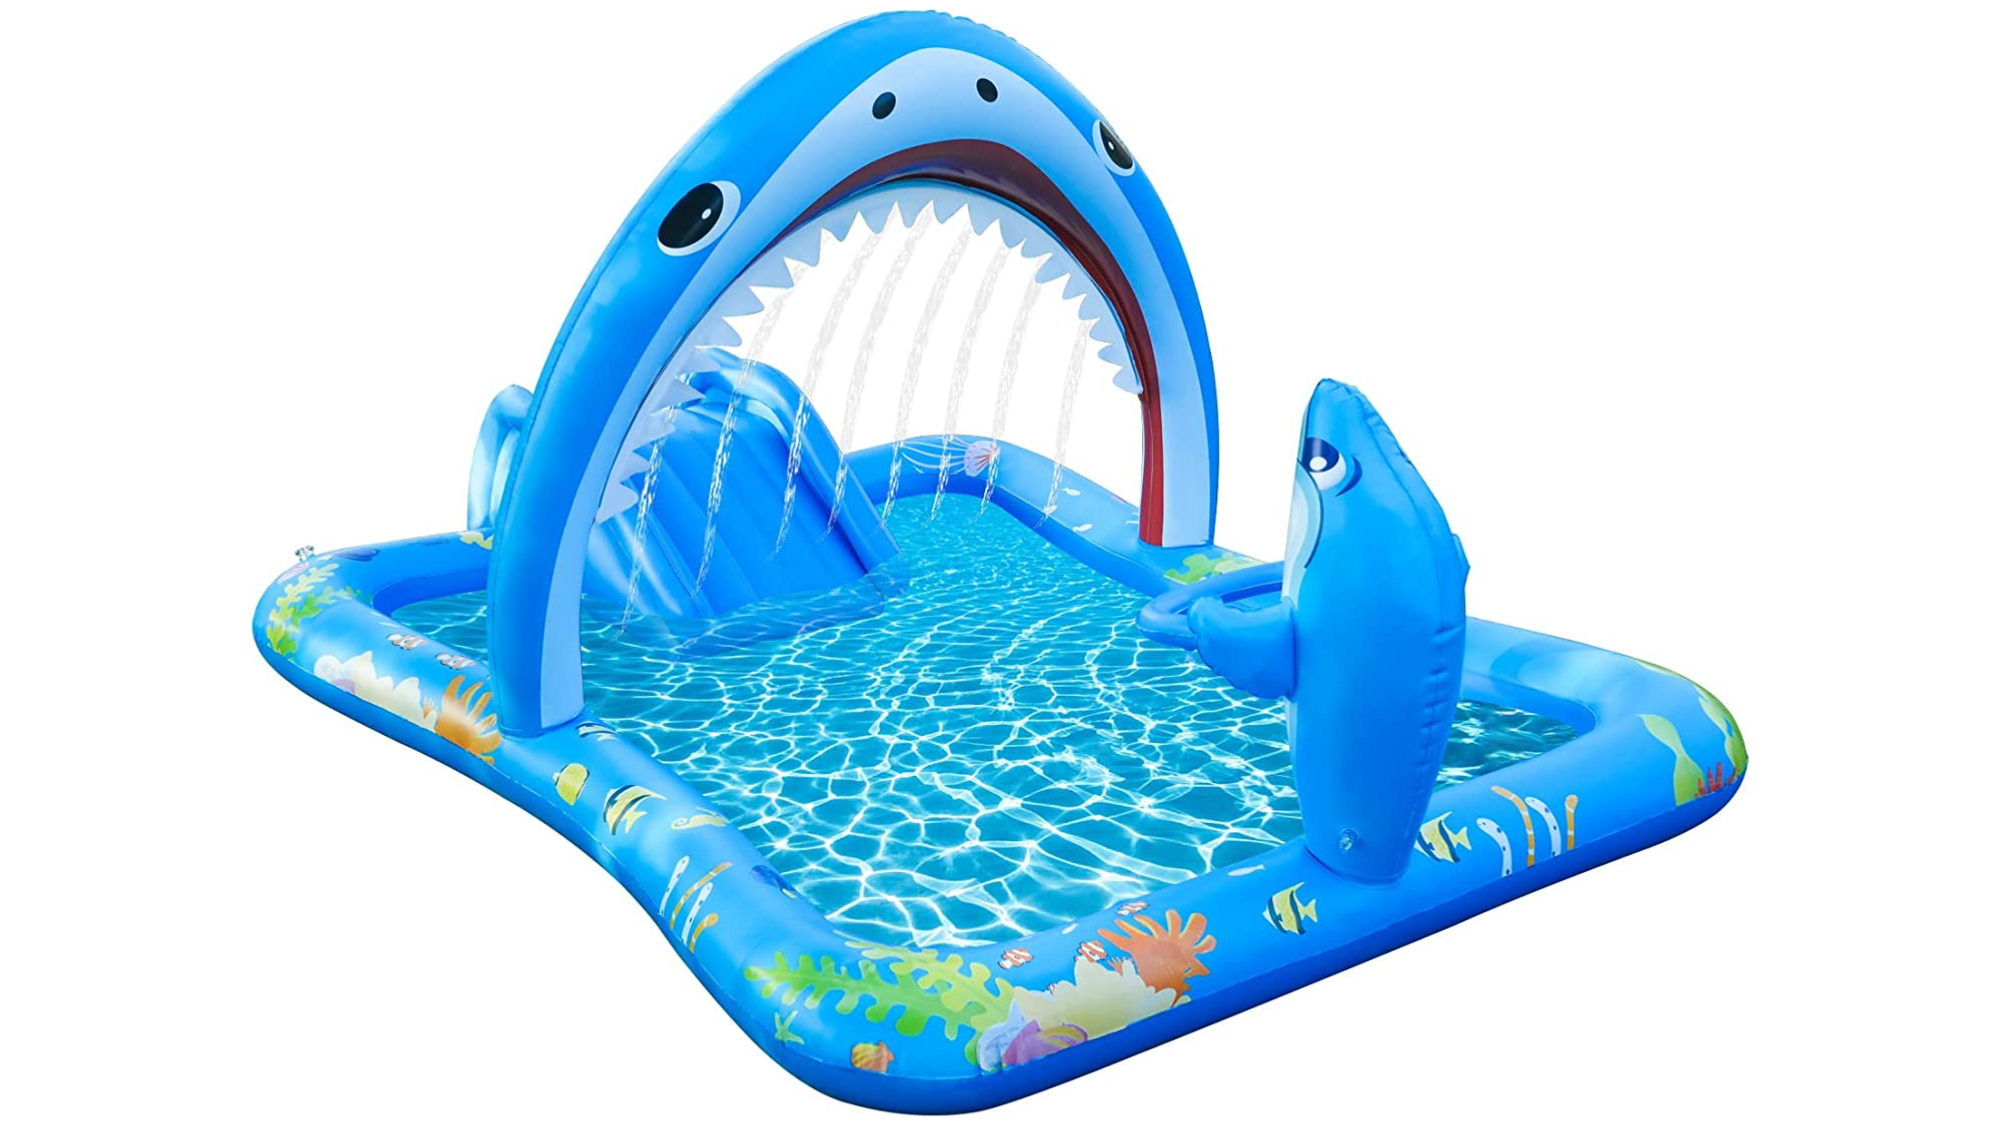 Image of blue inflatable pool with shark sprayers